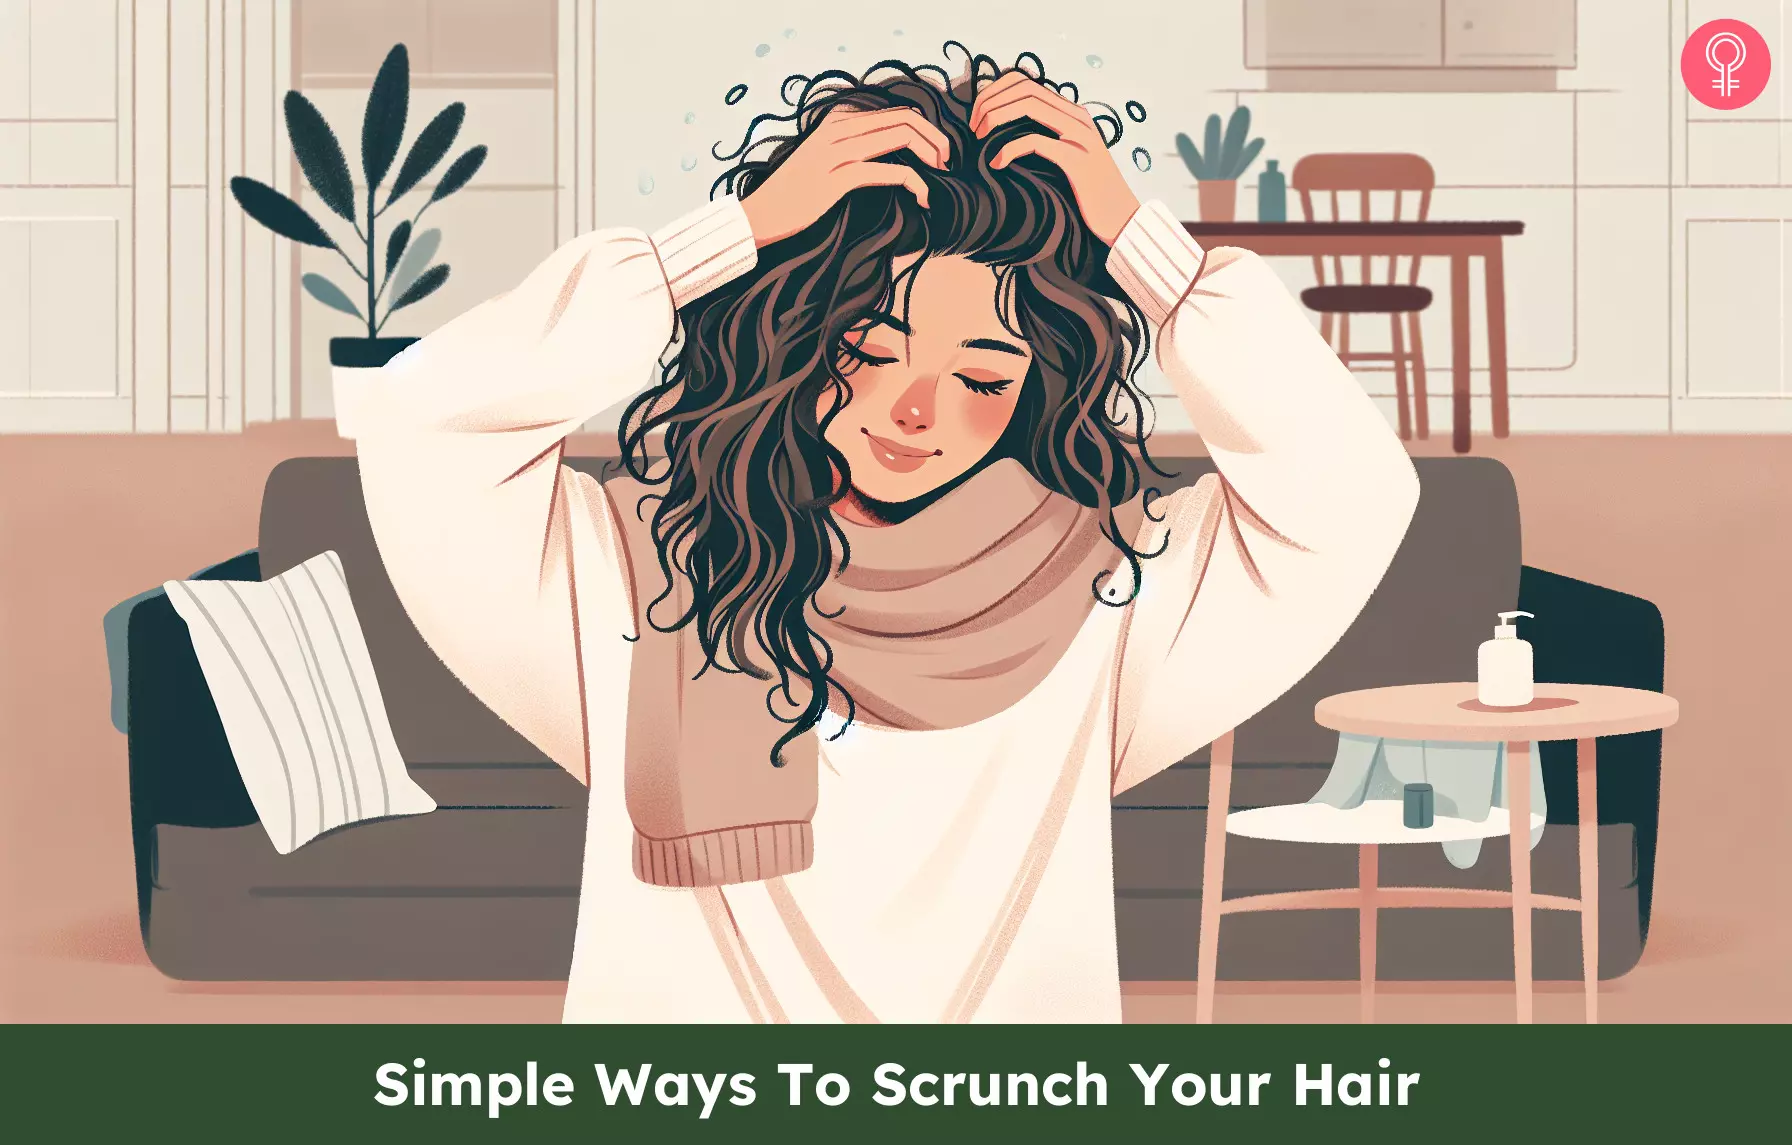 3 Simple Ways To Scrunch Your Hair